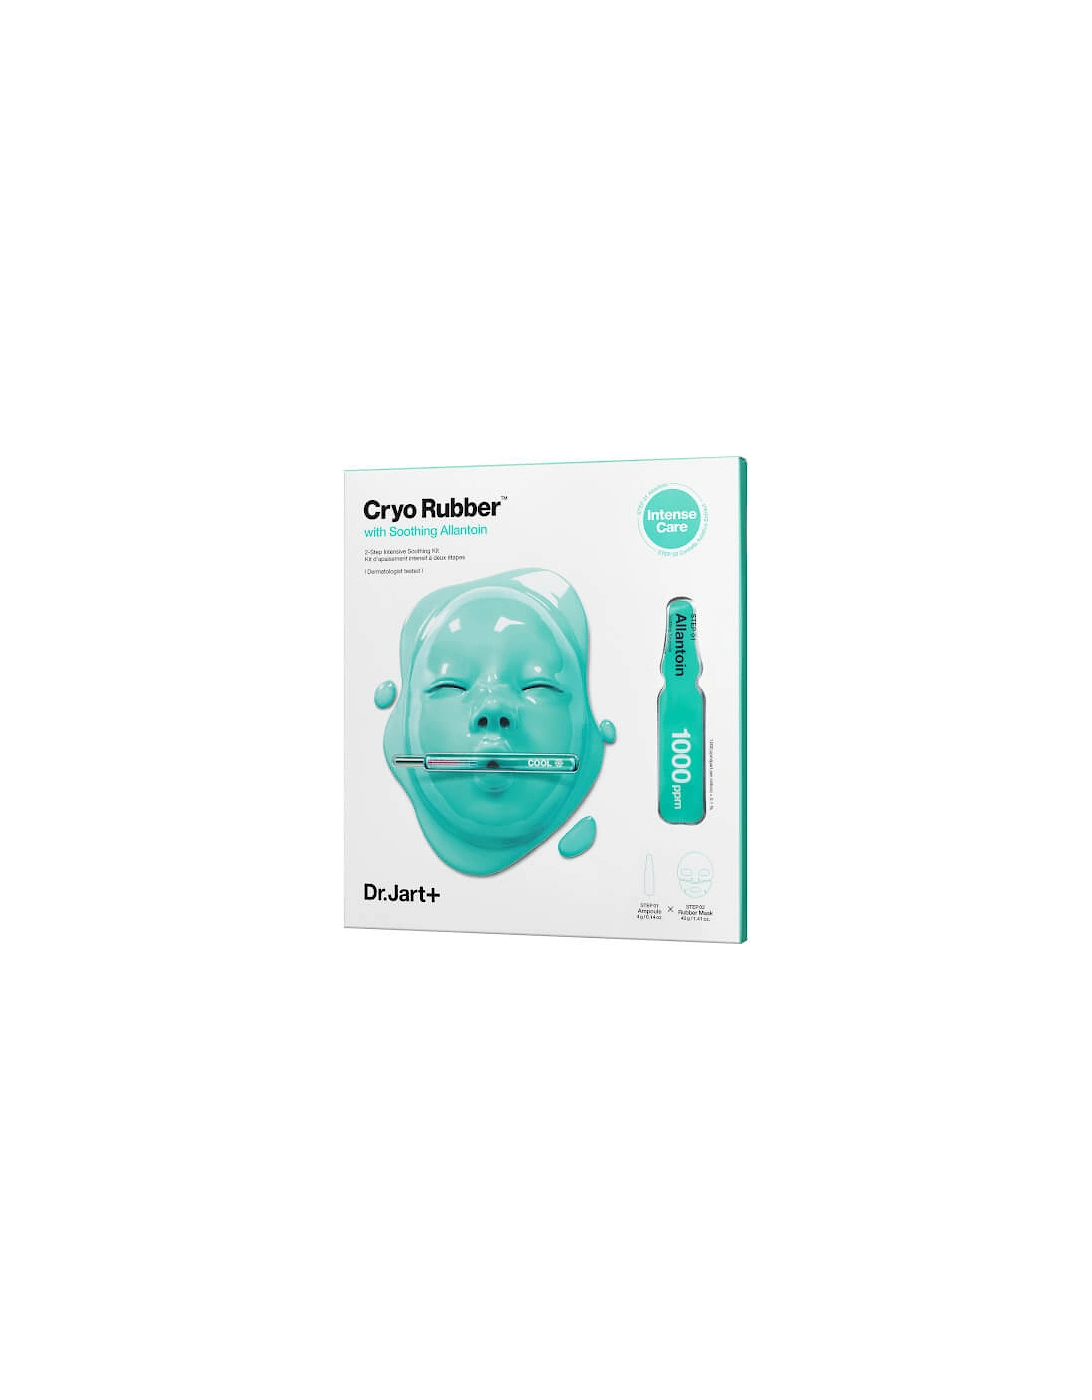 Dr.Jart+ Cryo Rubber Mask with Soothing Allantoin 44g, 2 of 1